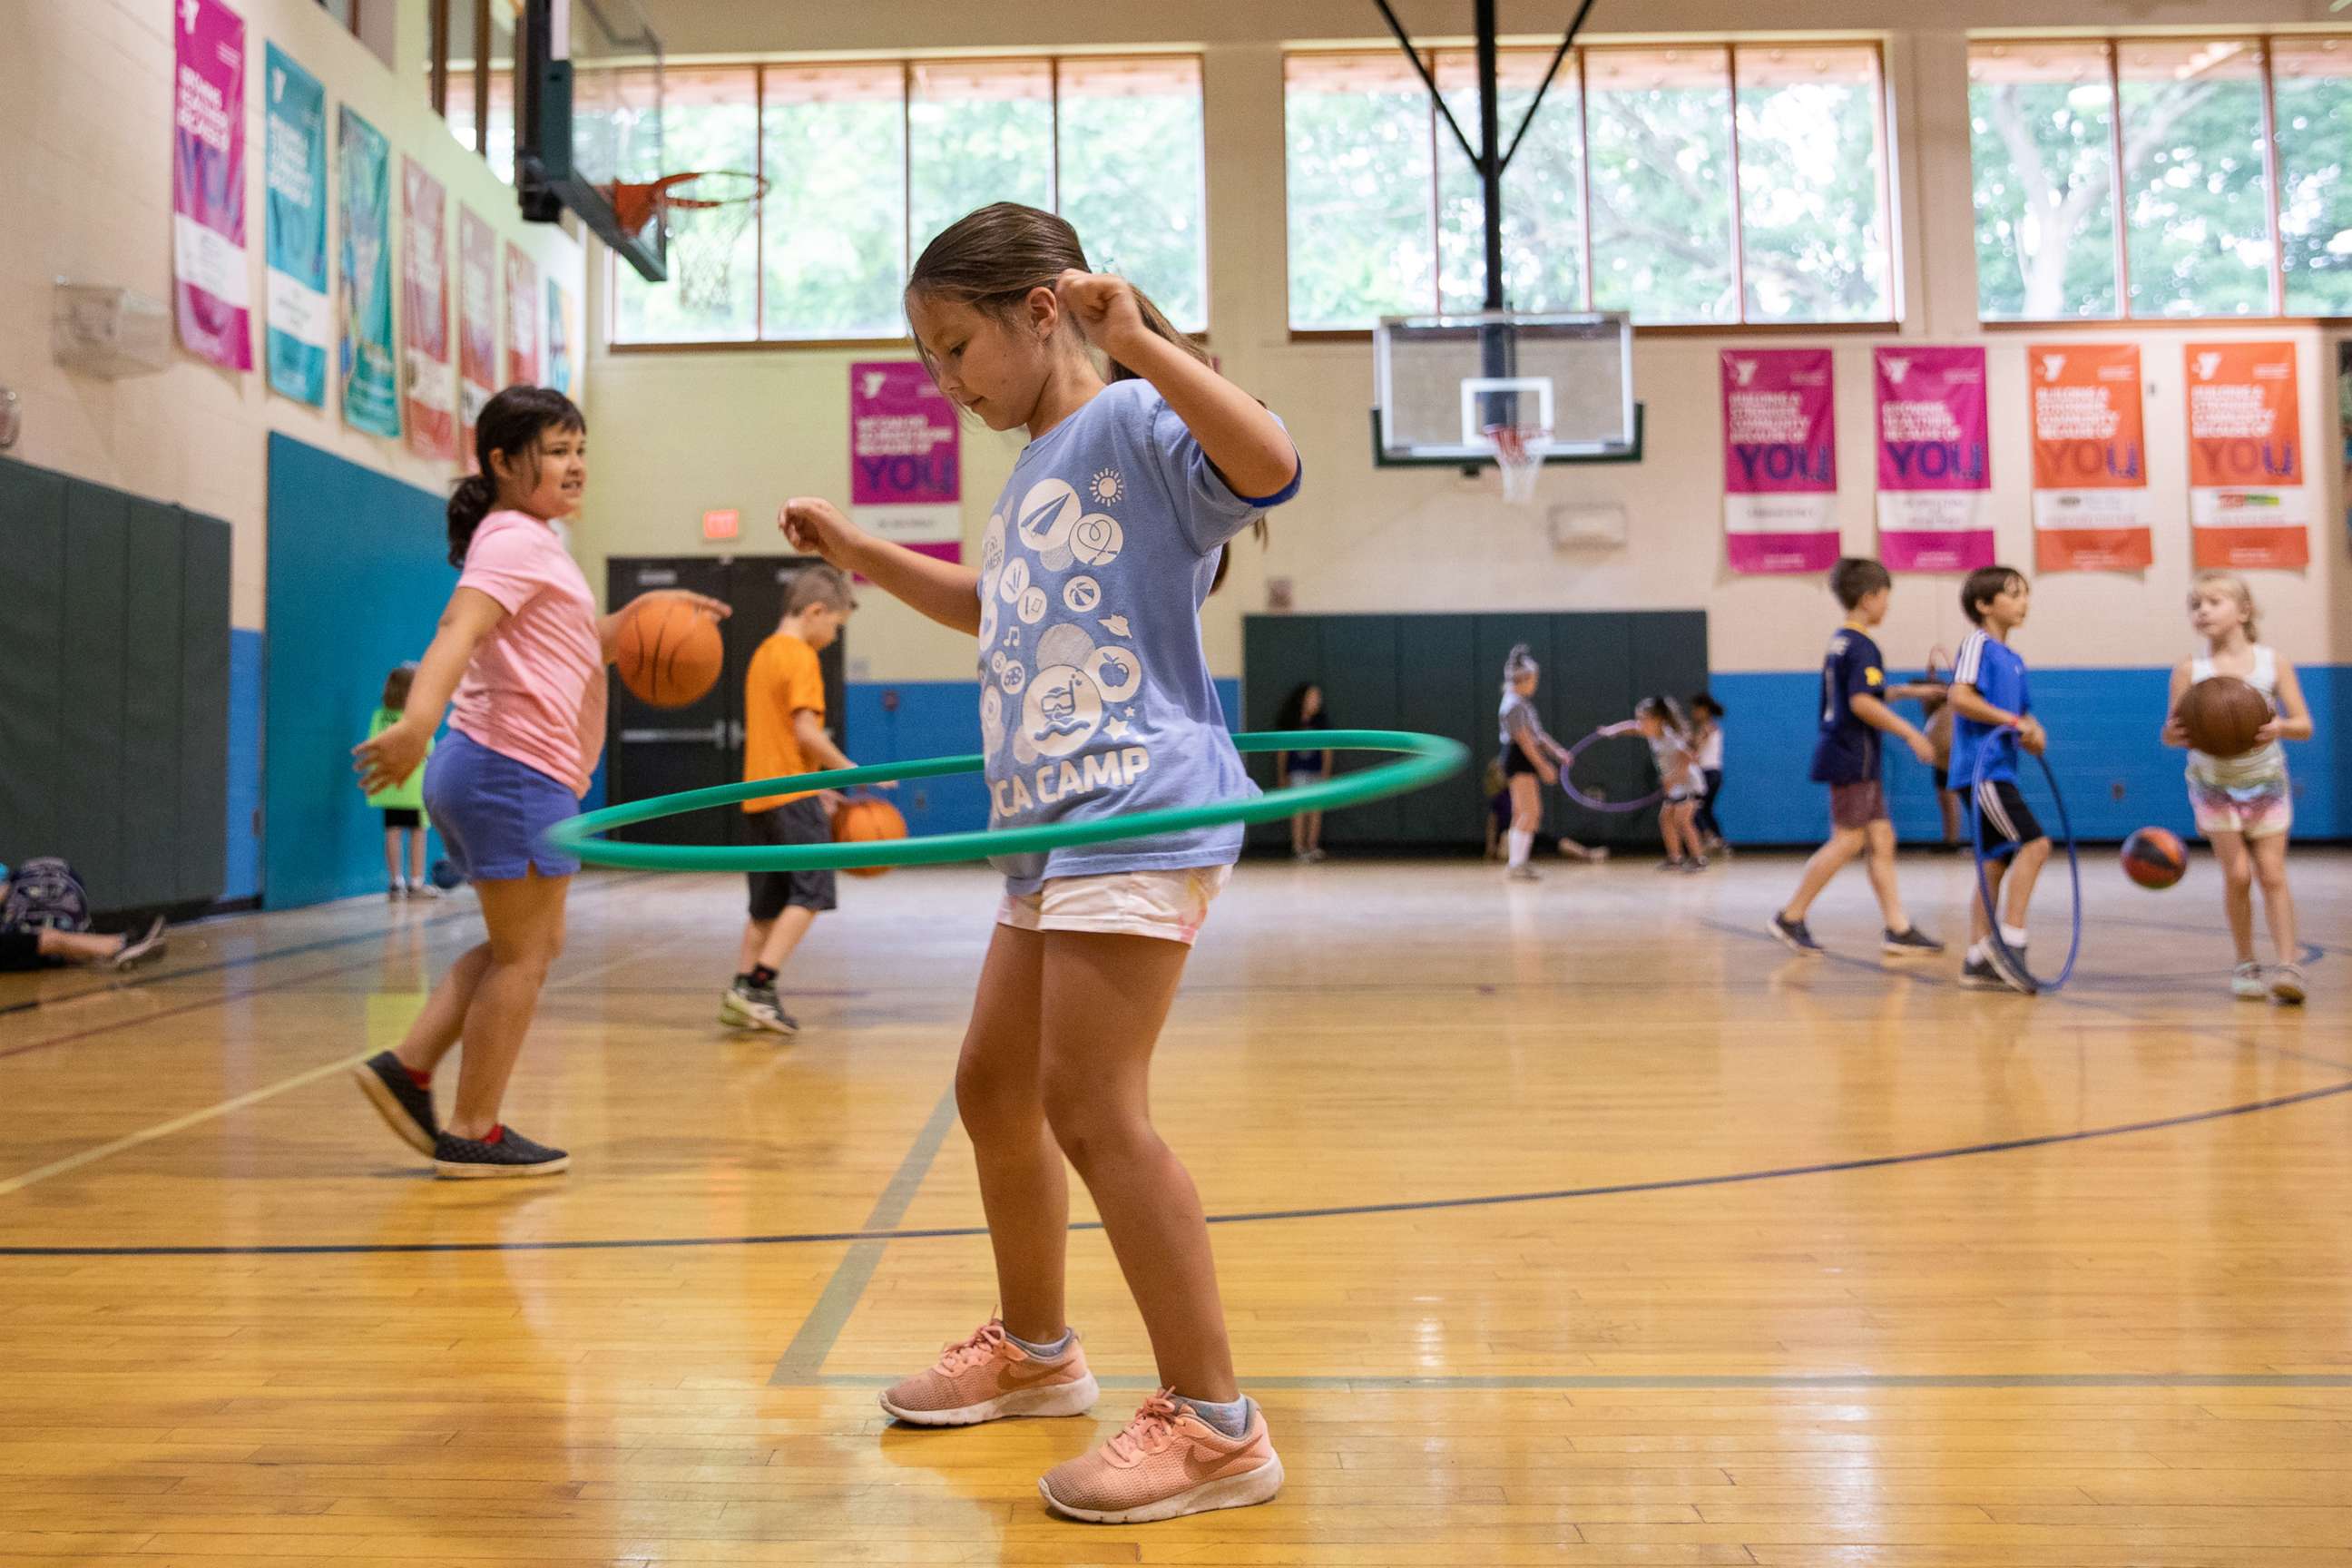 PHOTO: In this June 23, 2020, file photo, children play in the gym amid the coronavirus disease outbreak, at Carls Family YMCA summer camp in Milford, Mich.